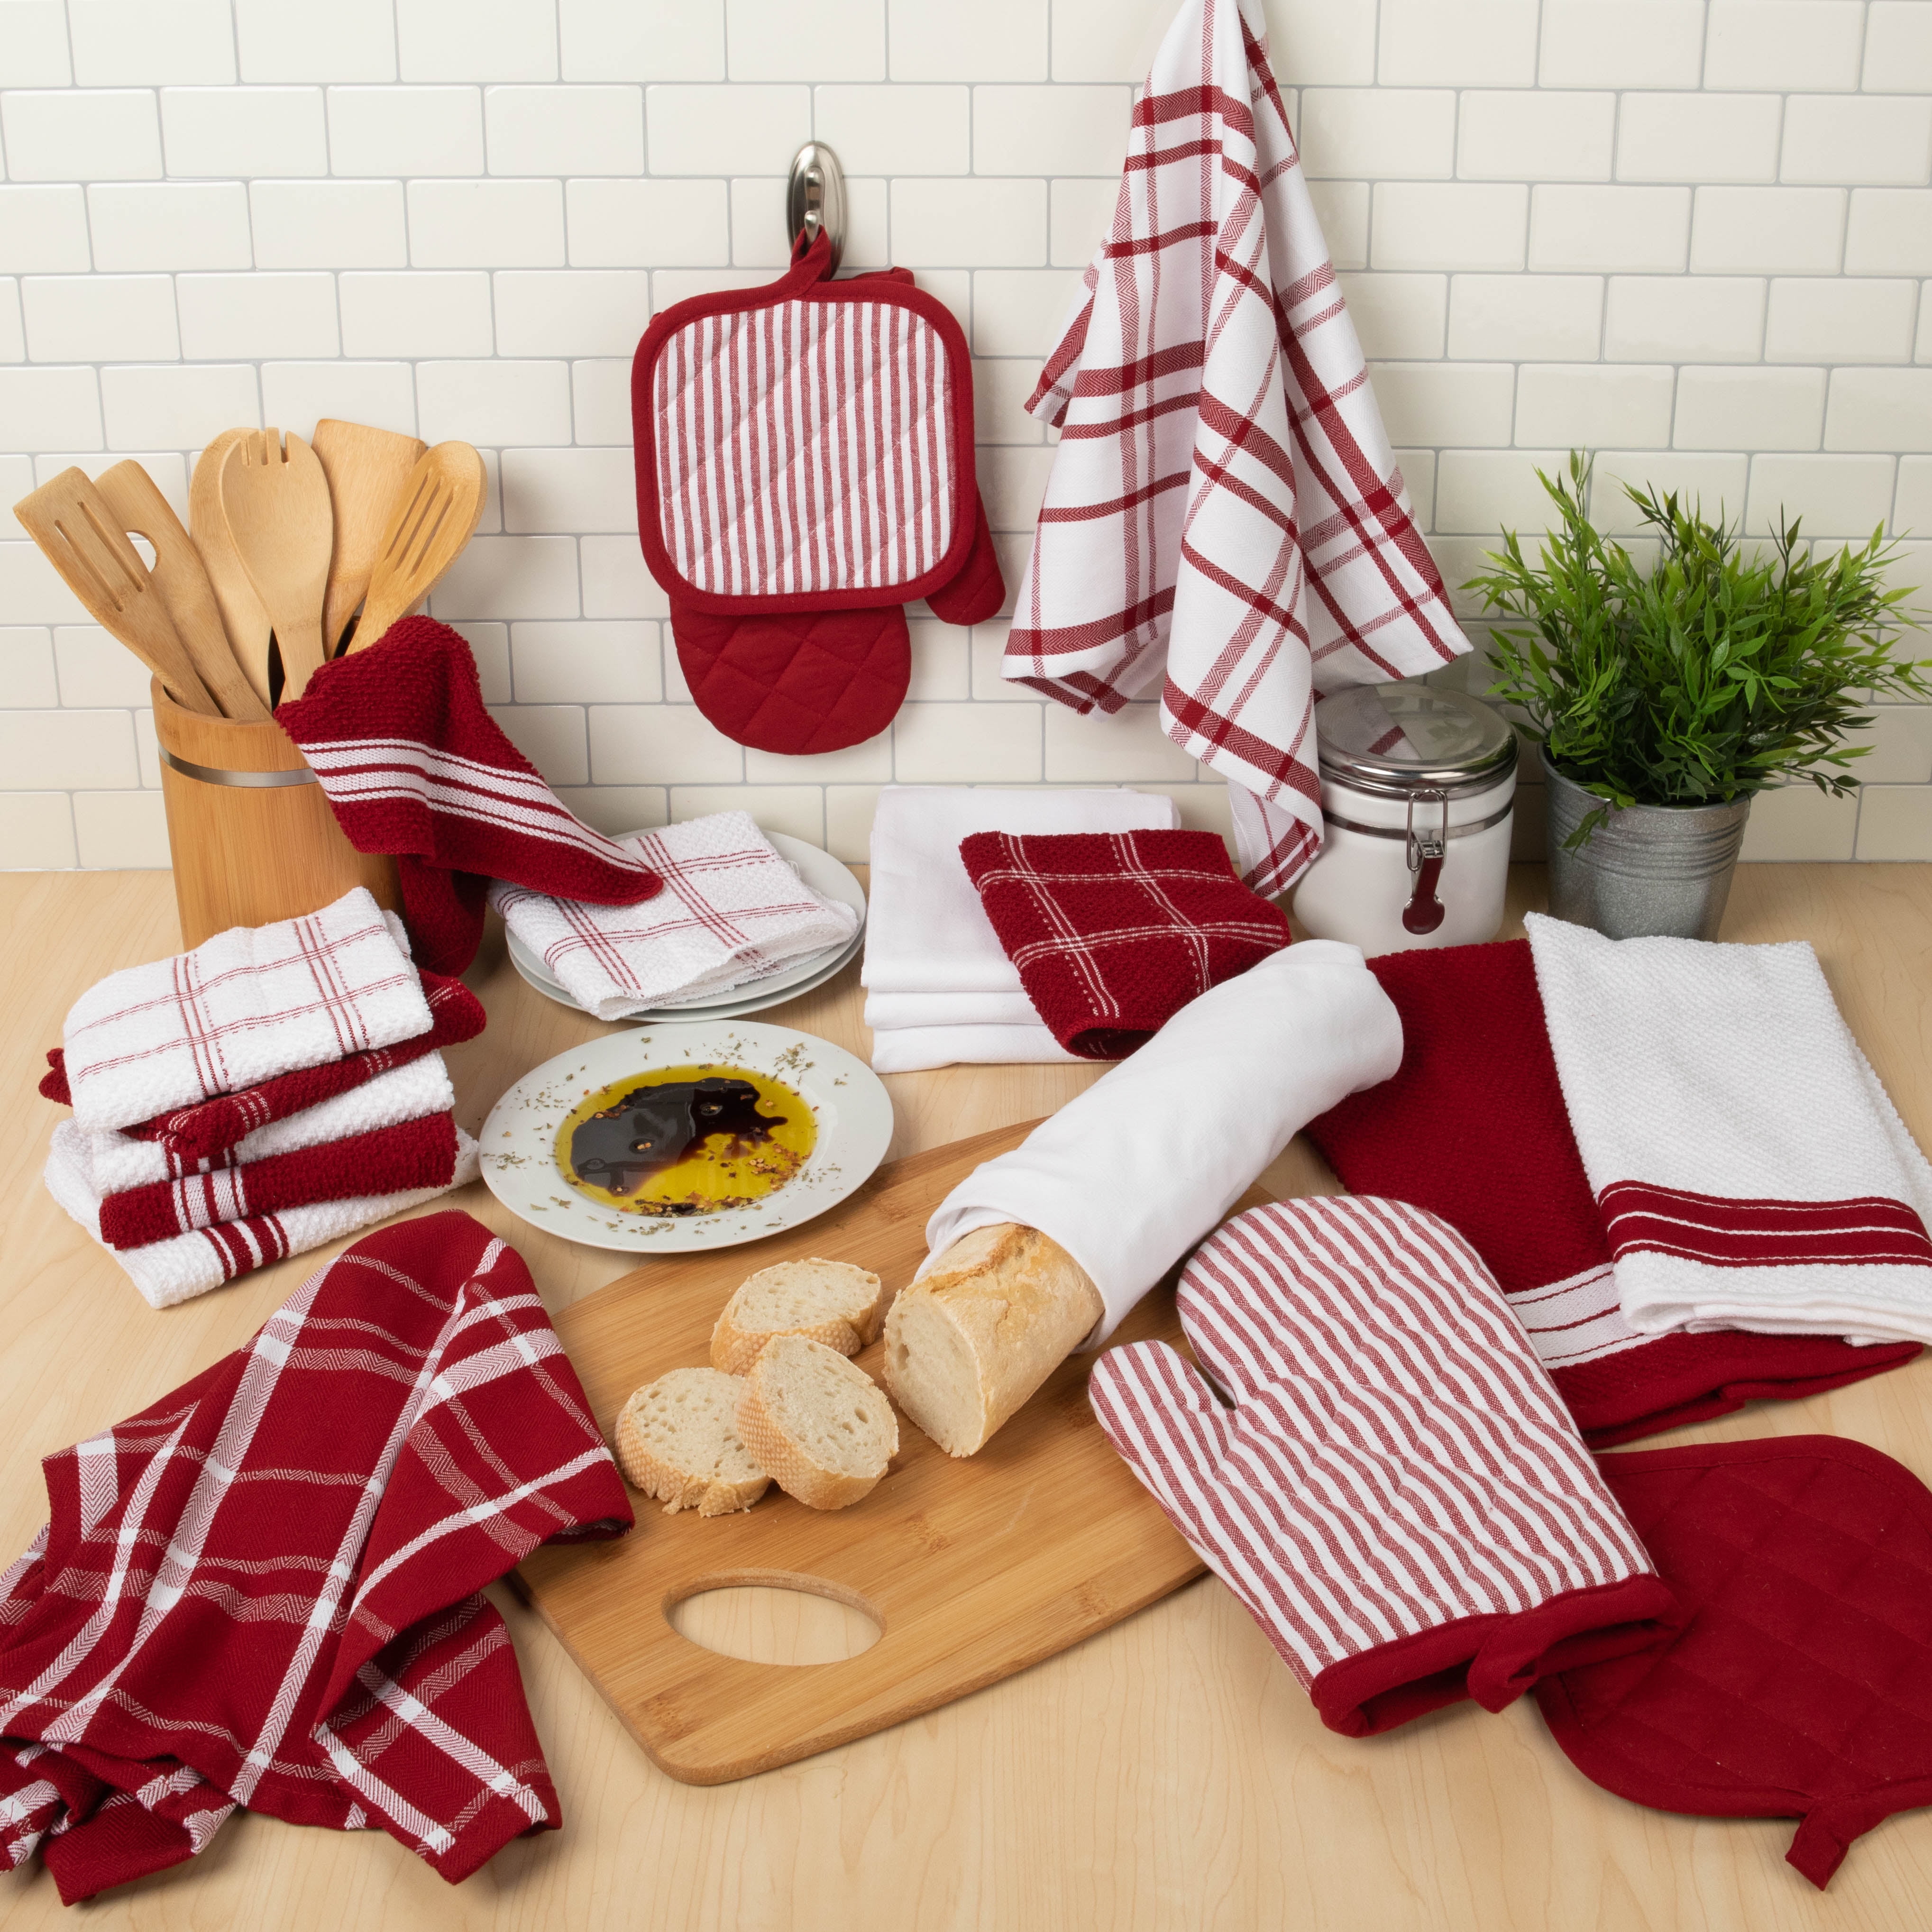 Two Terry Cloth Kitchen Towels with Matching Four Pack of Dish Cloths by Food Network